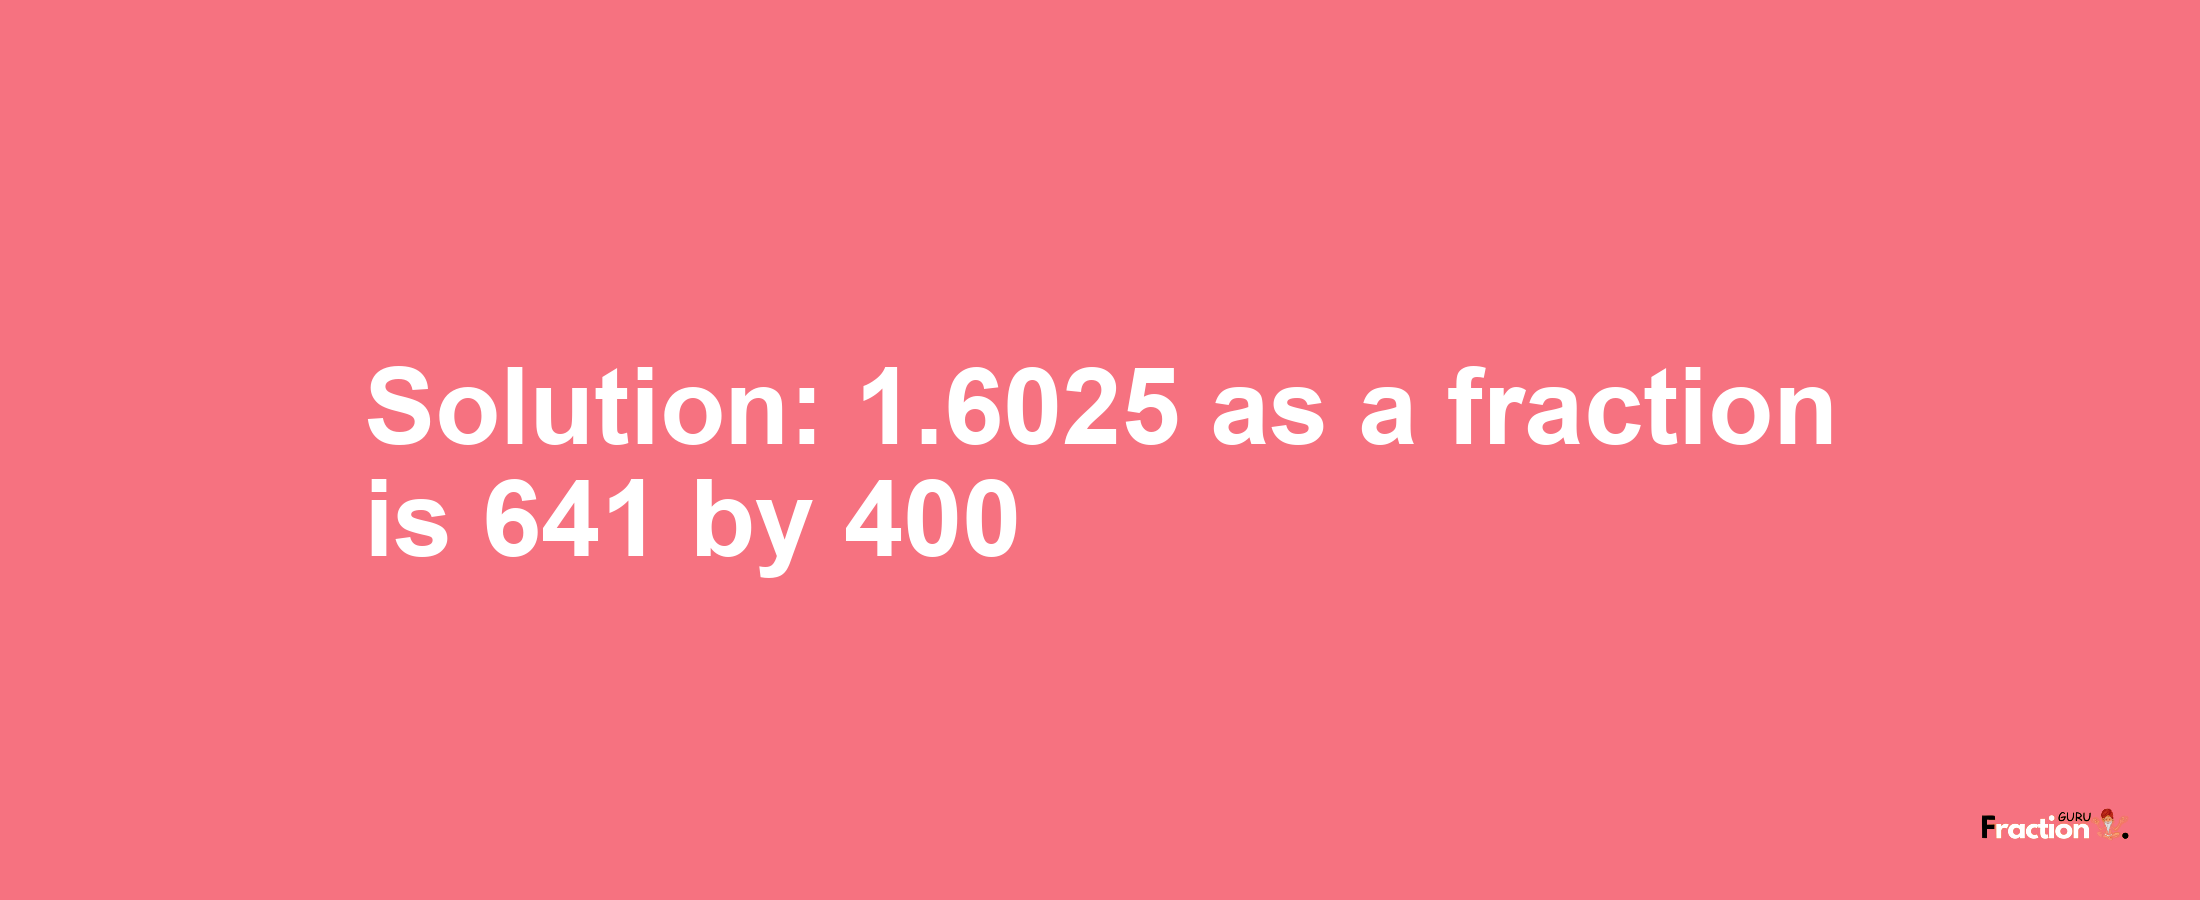 Solution:1.6025 as a fraction is 641/400